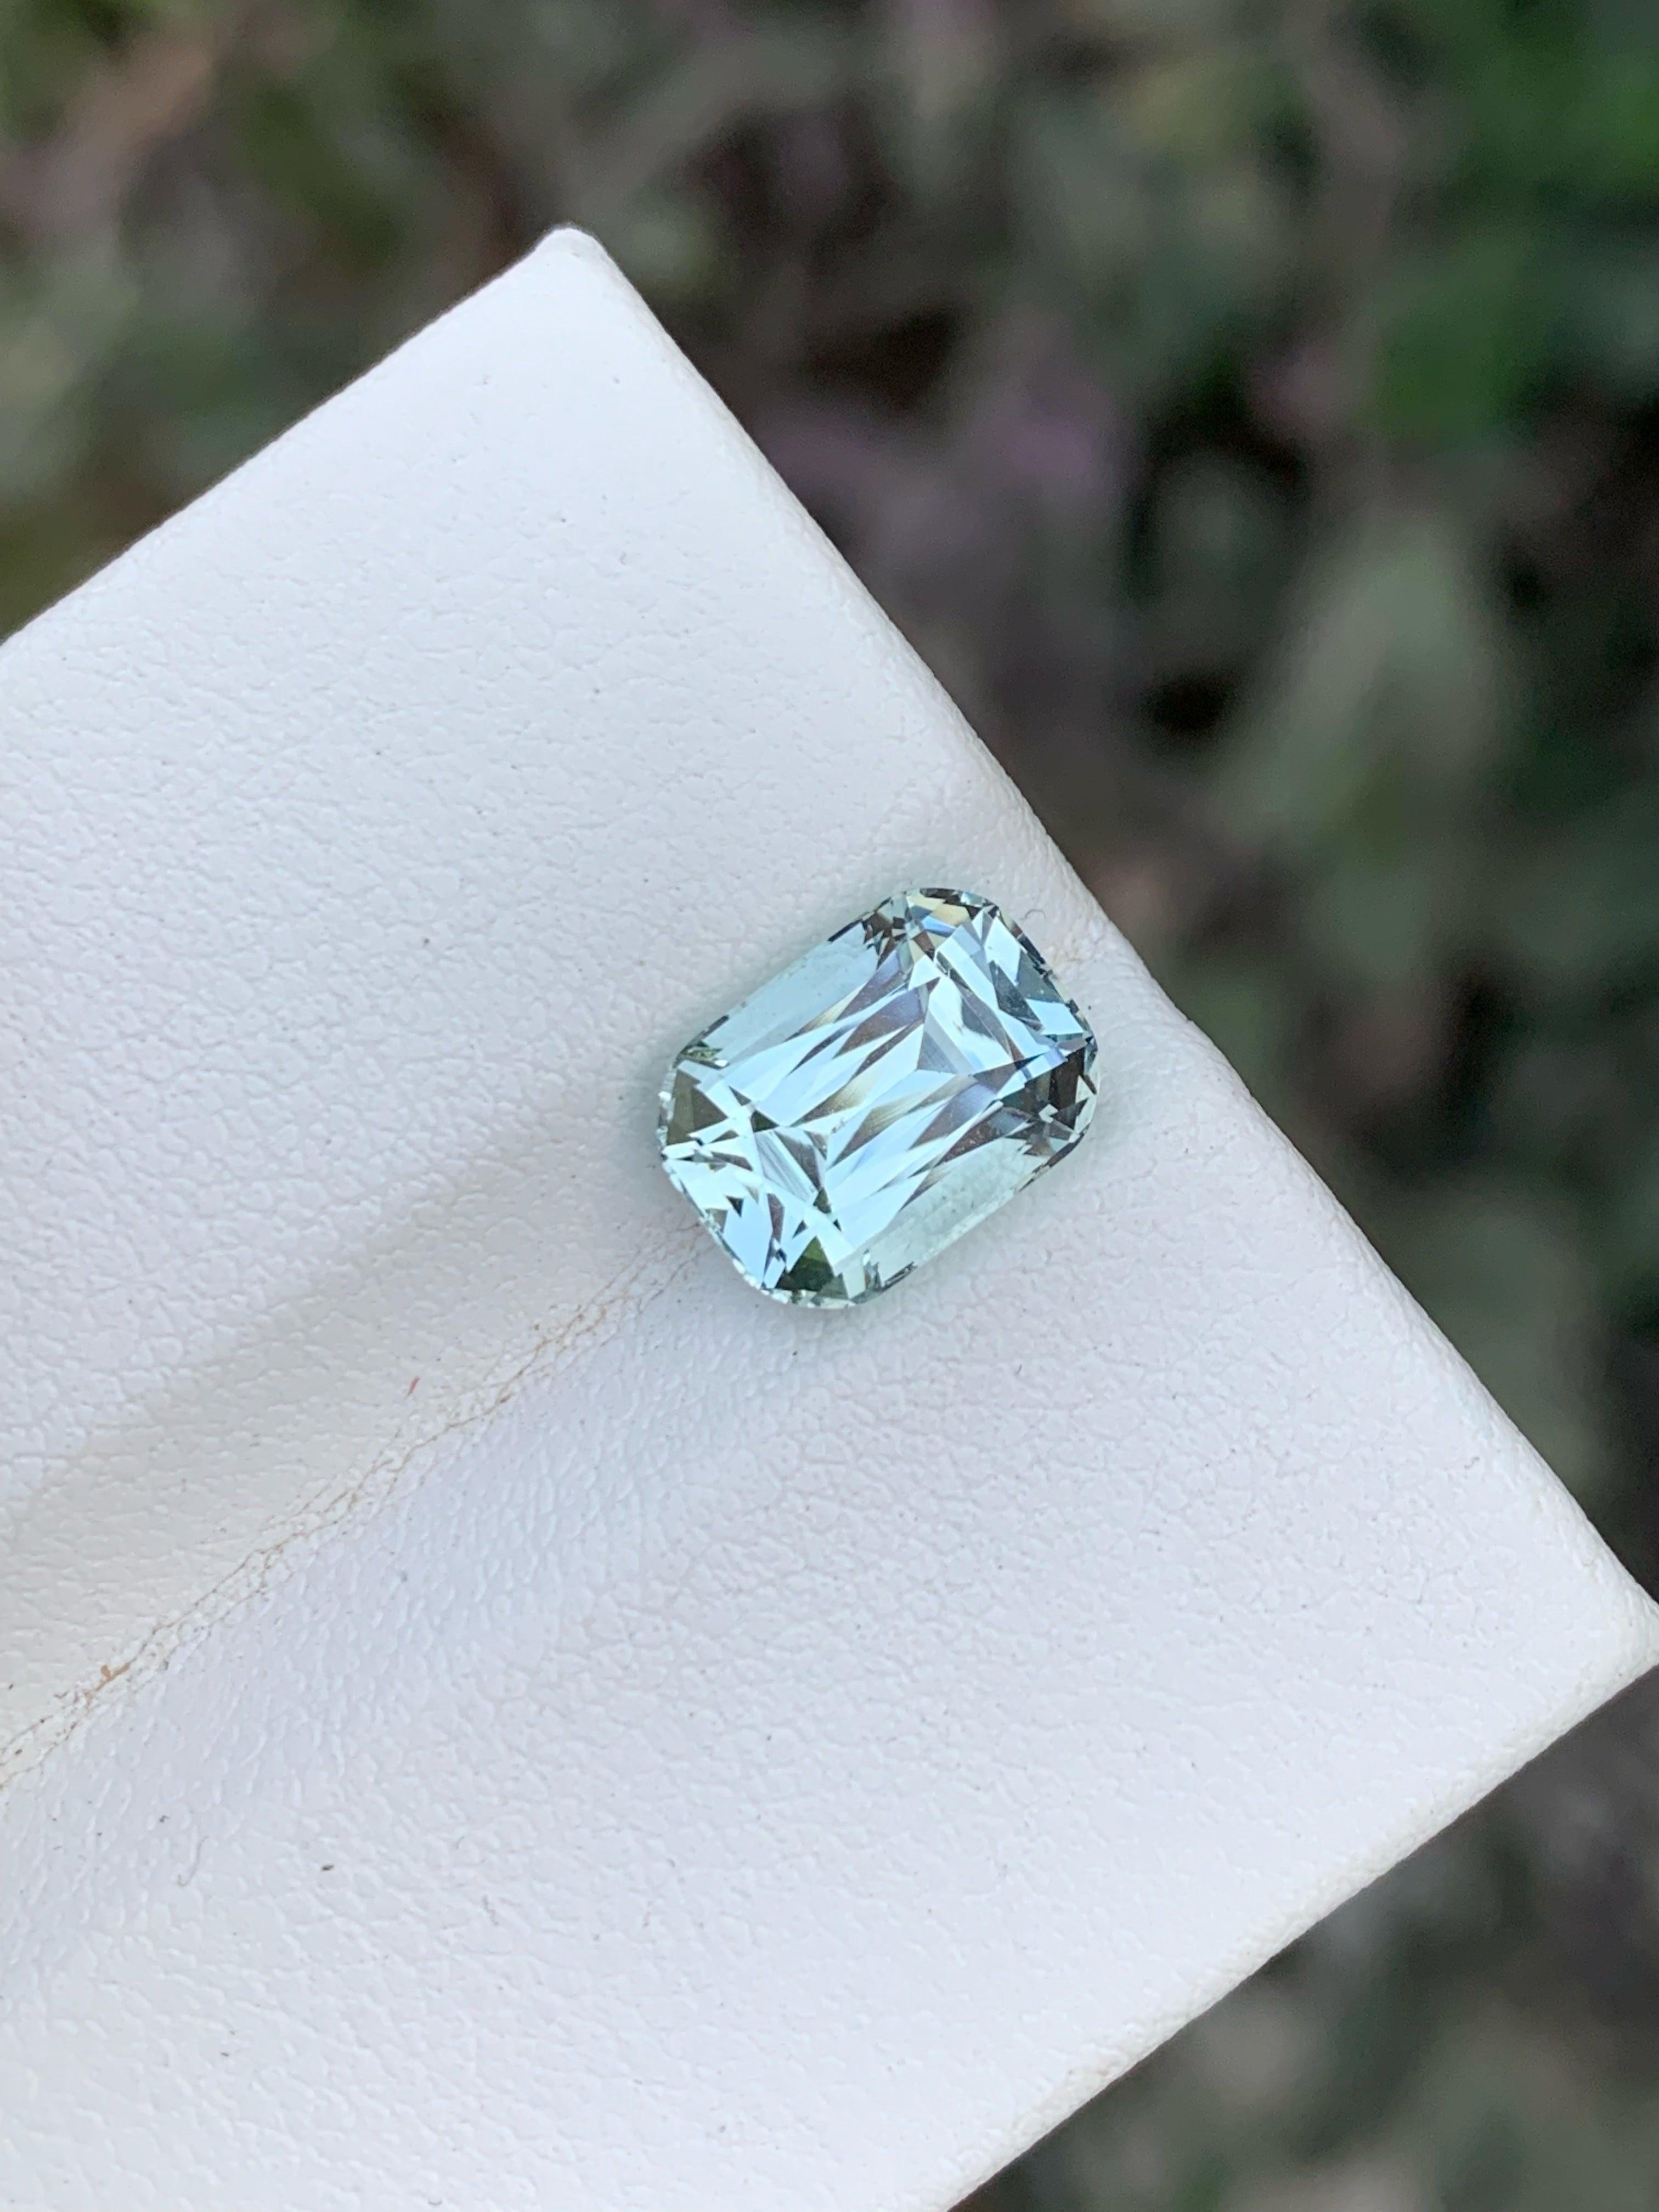 Natural Aquamarine stone, available for sale at wholesale price natural high quality 3.00 Carats Eye Clean Clarity Loose Aquamarine from Pakistan.

Product Information:
GEMSTONE NAME: Blizzard Sea Blue Aquamarine Stone
WEIGHT:	3.00